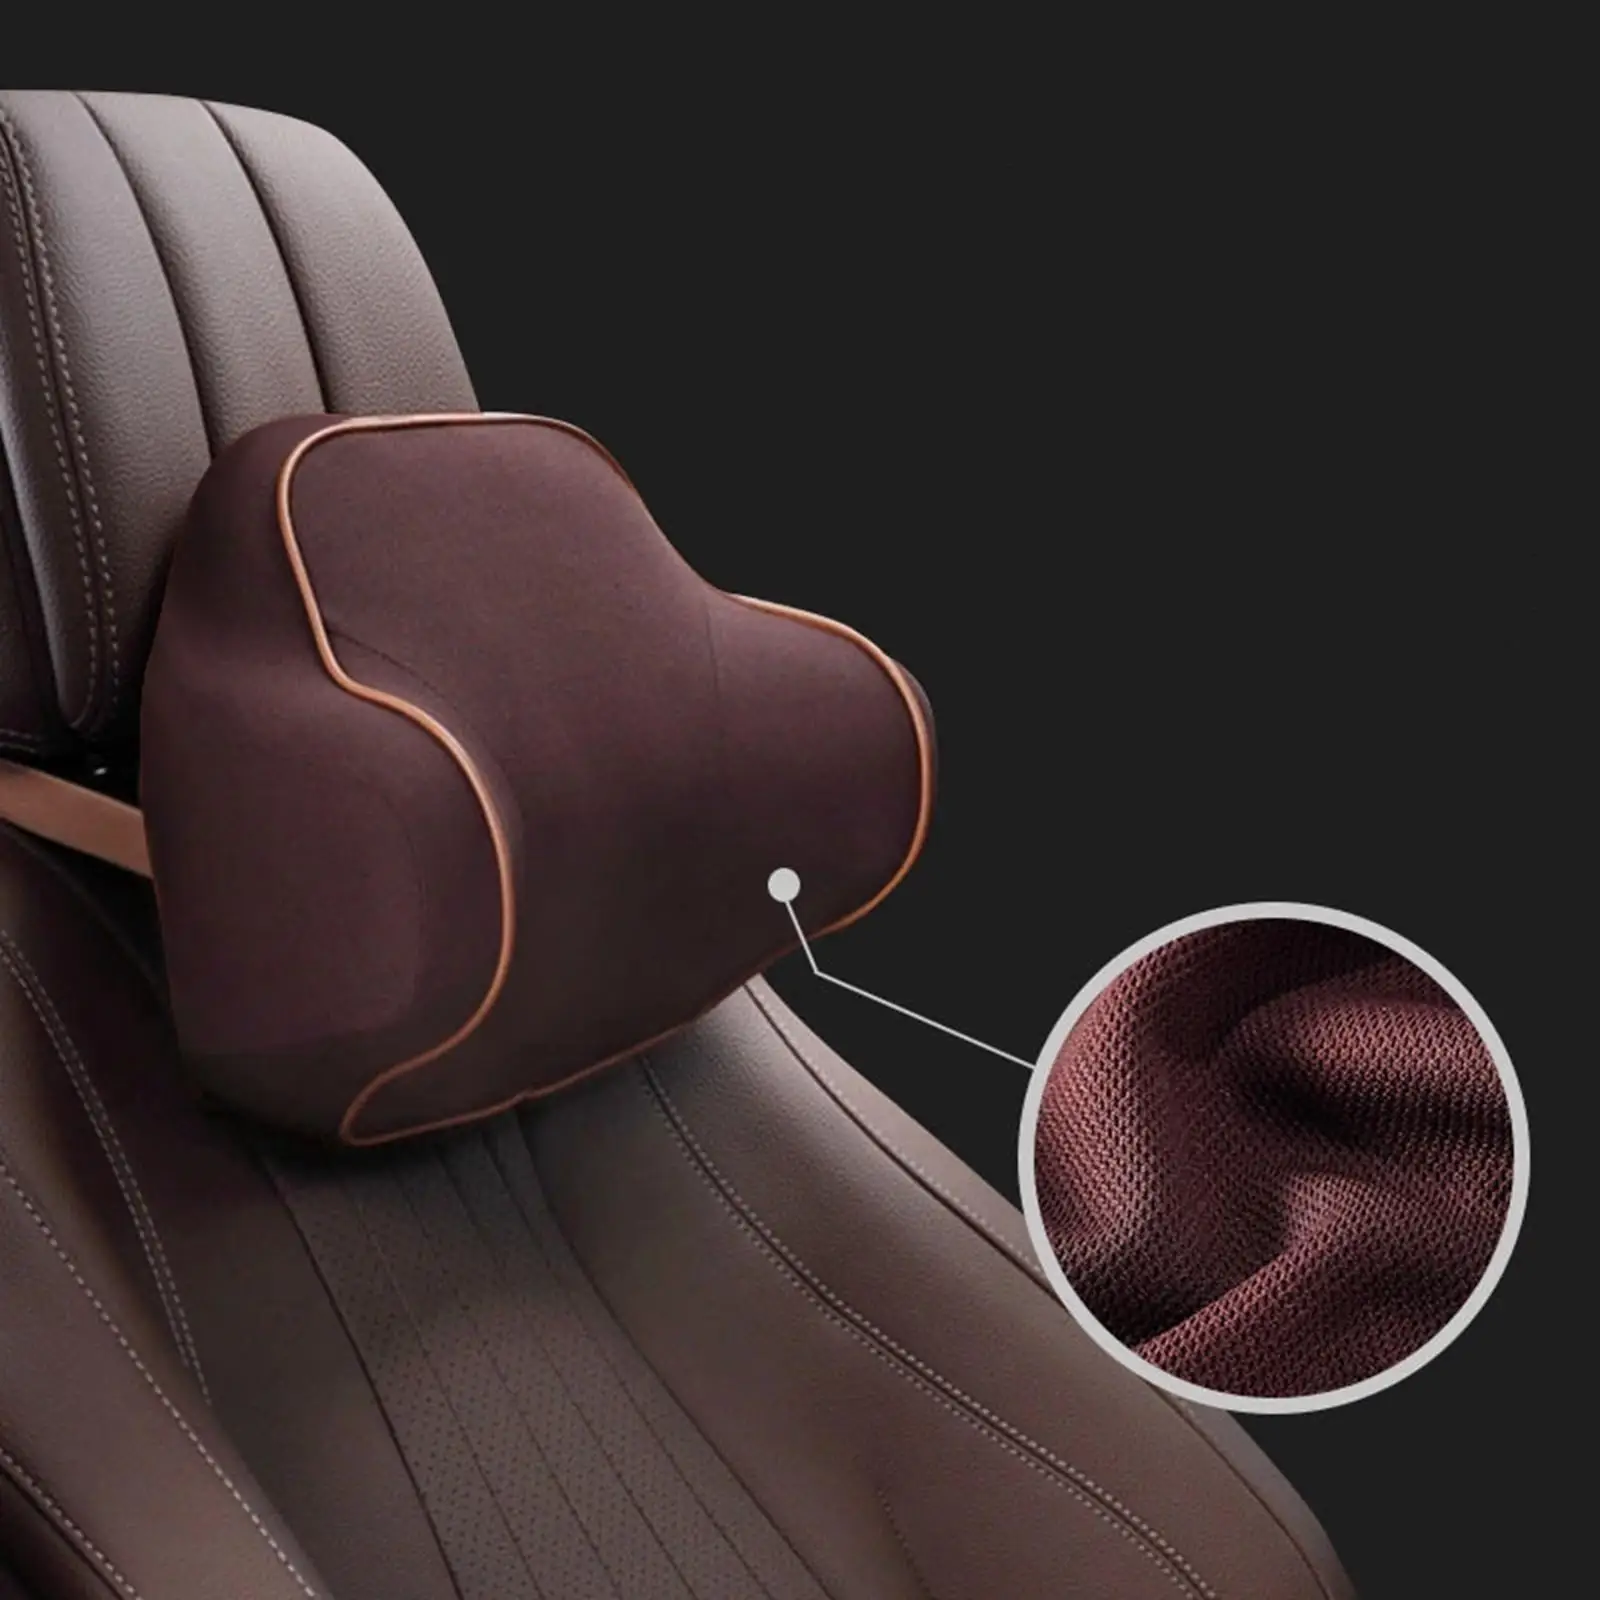 Car Headrest Pillow Memory Foam Protector High Simple Installation Comfortable Adjustable Elastic Band for Office Chair